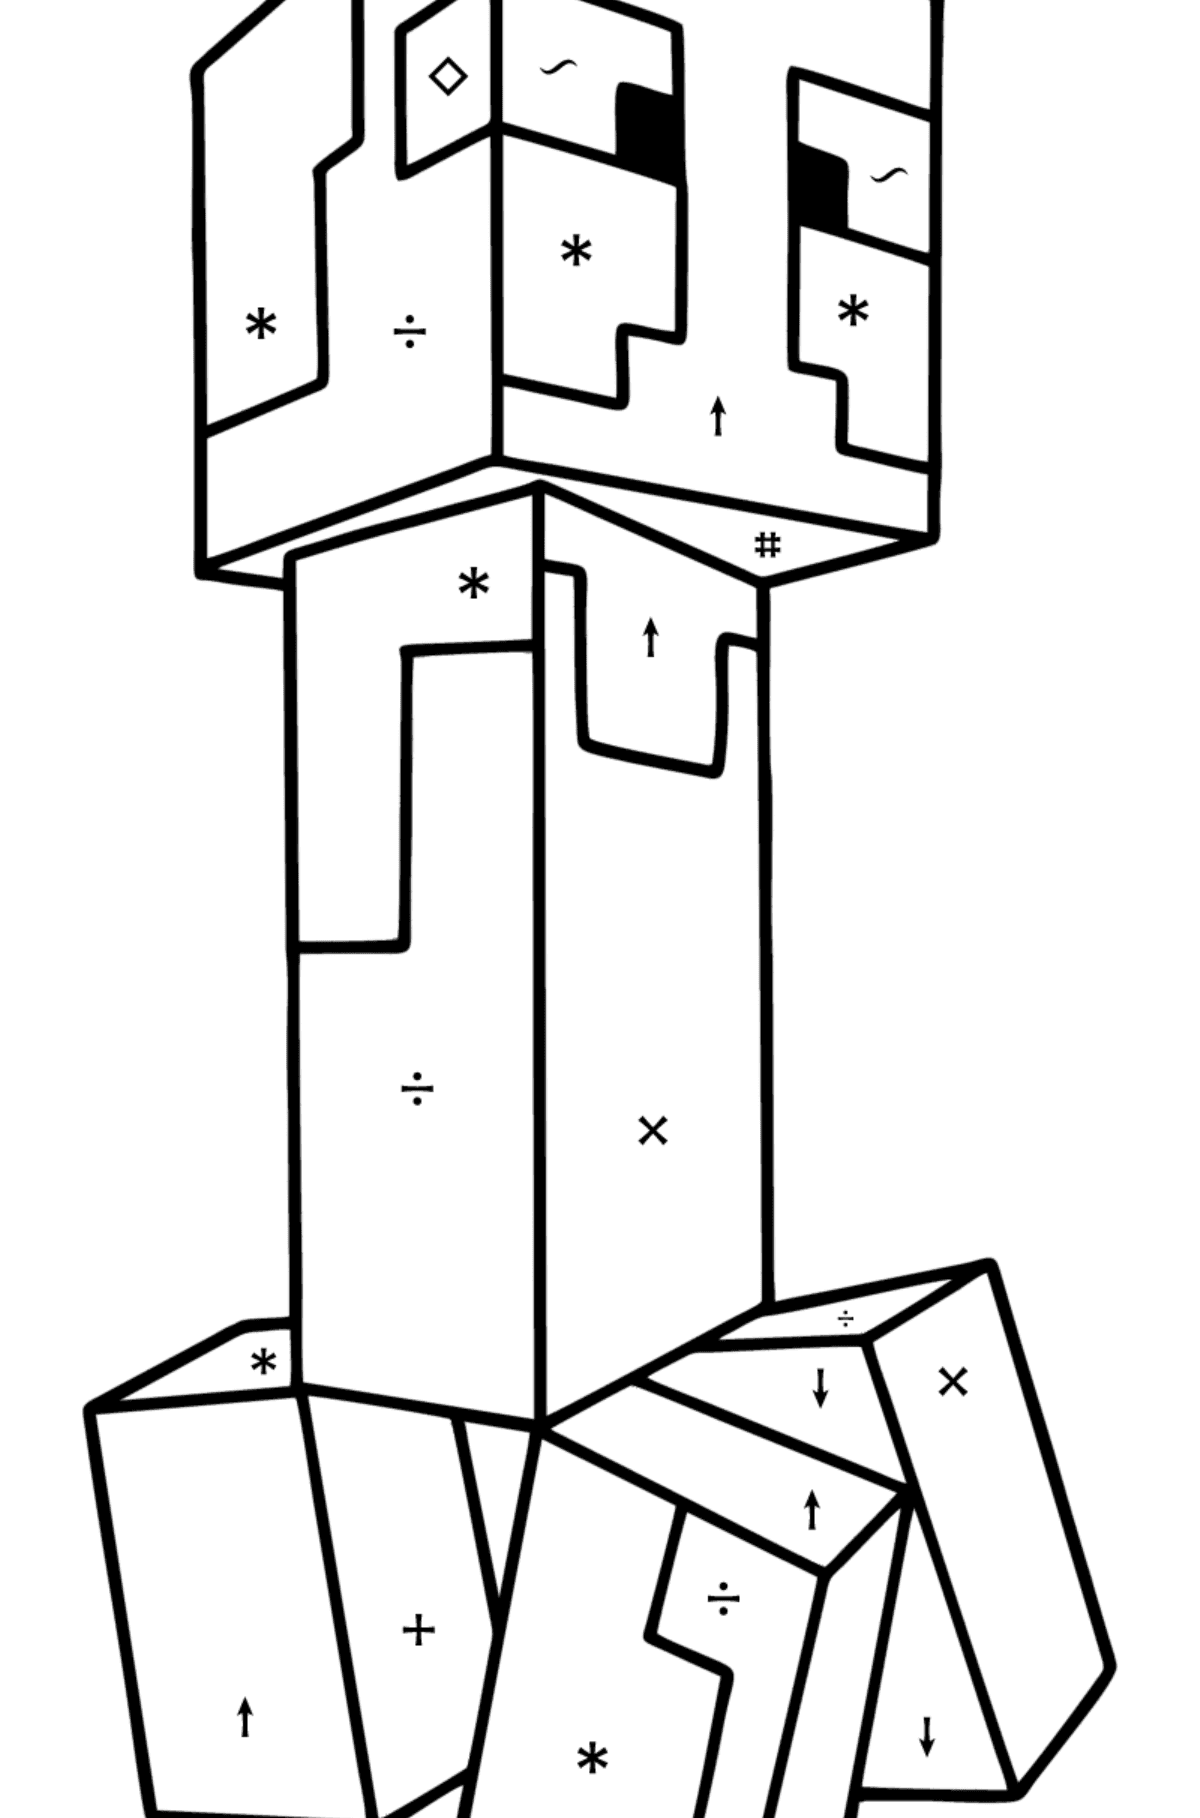 Minecraft Creeper coloring page - Coloring by Symbols for Kids